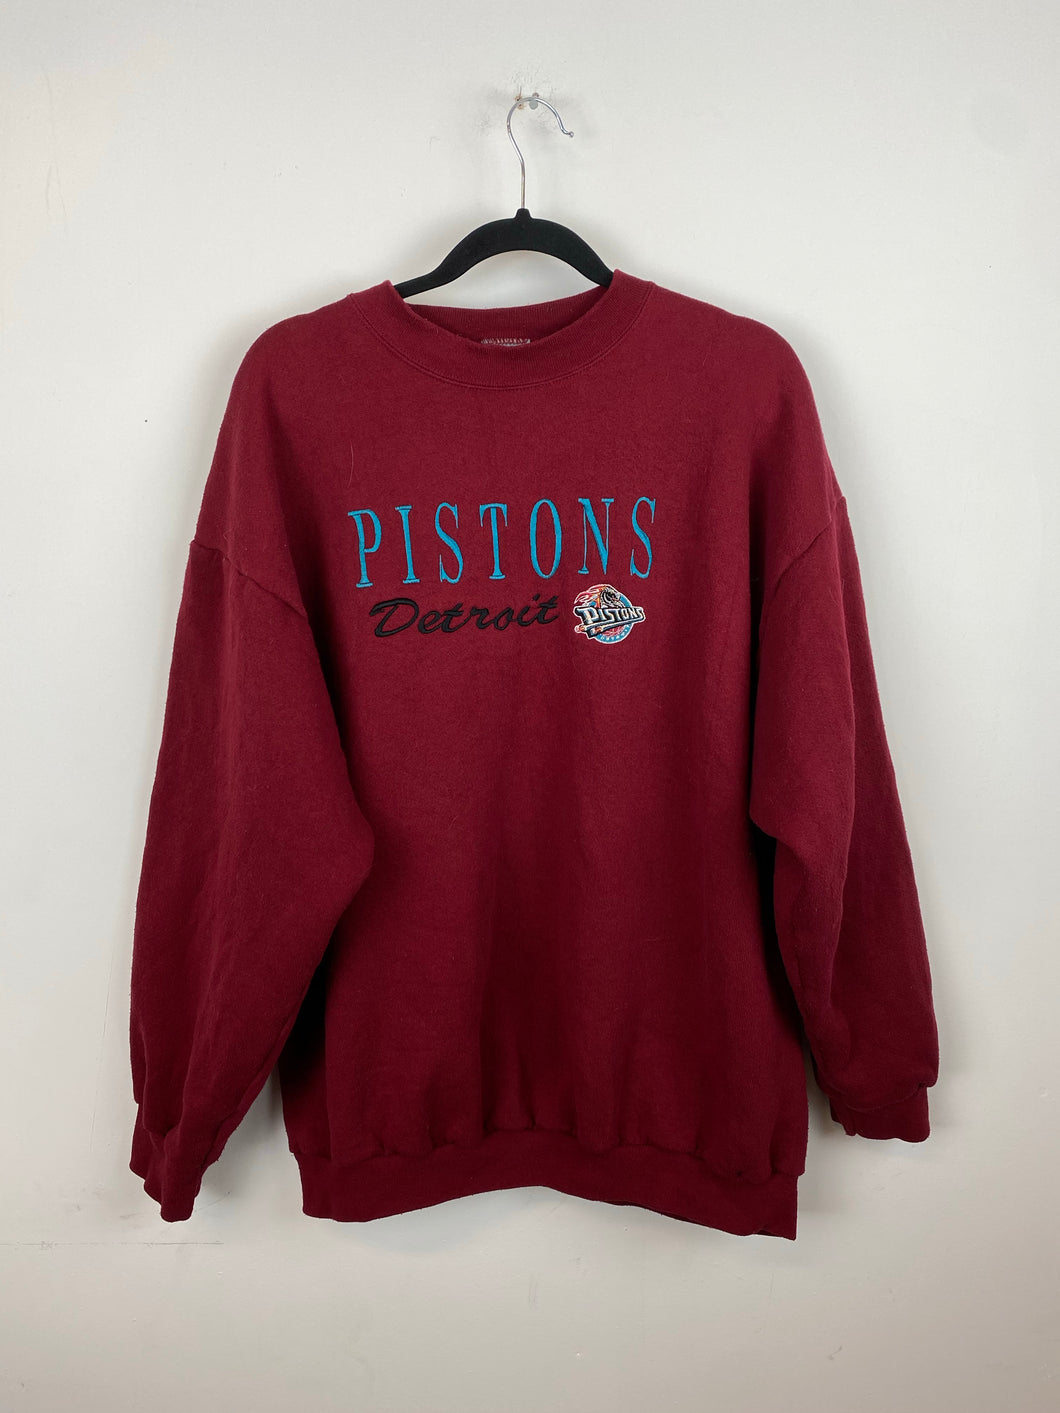 90s Embroidered Pistons crewneck - L